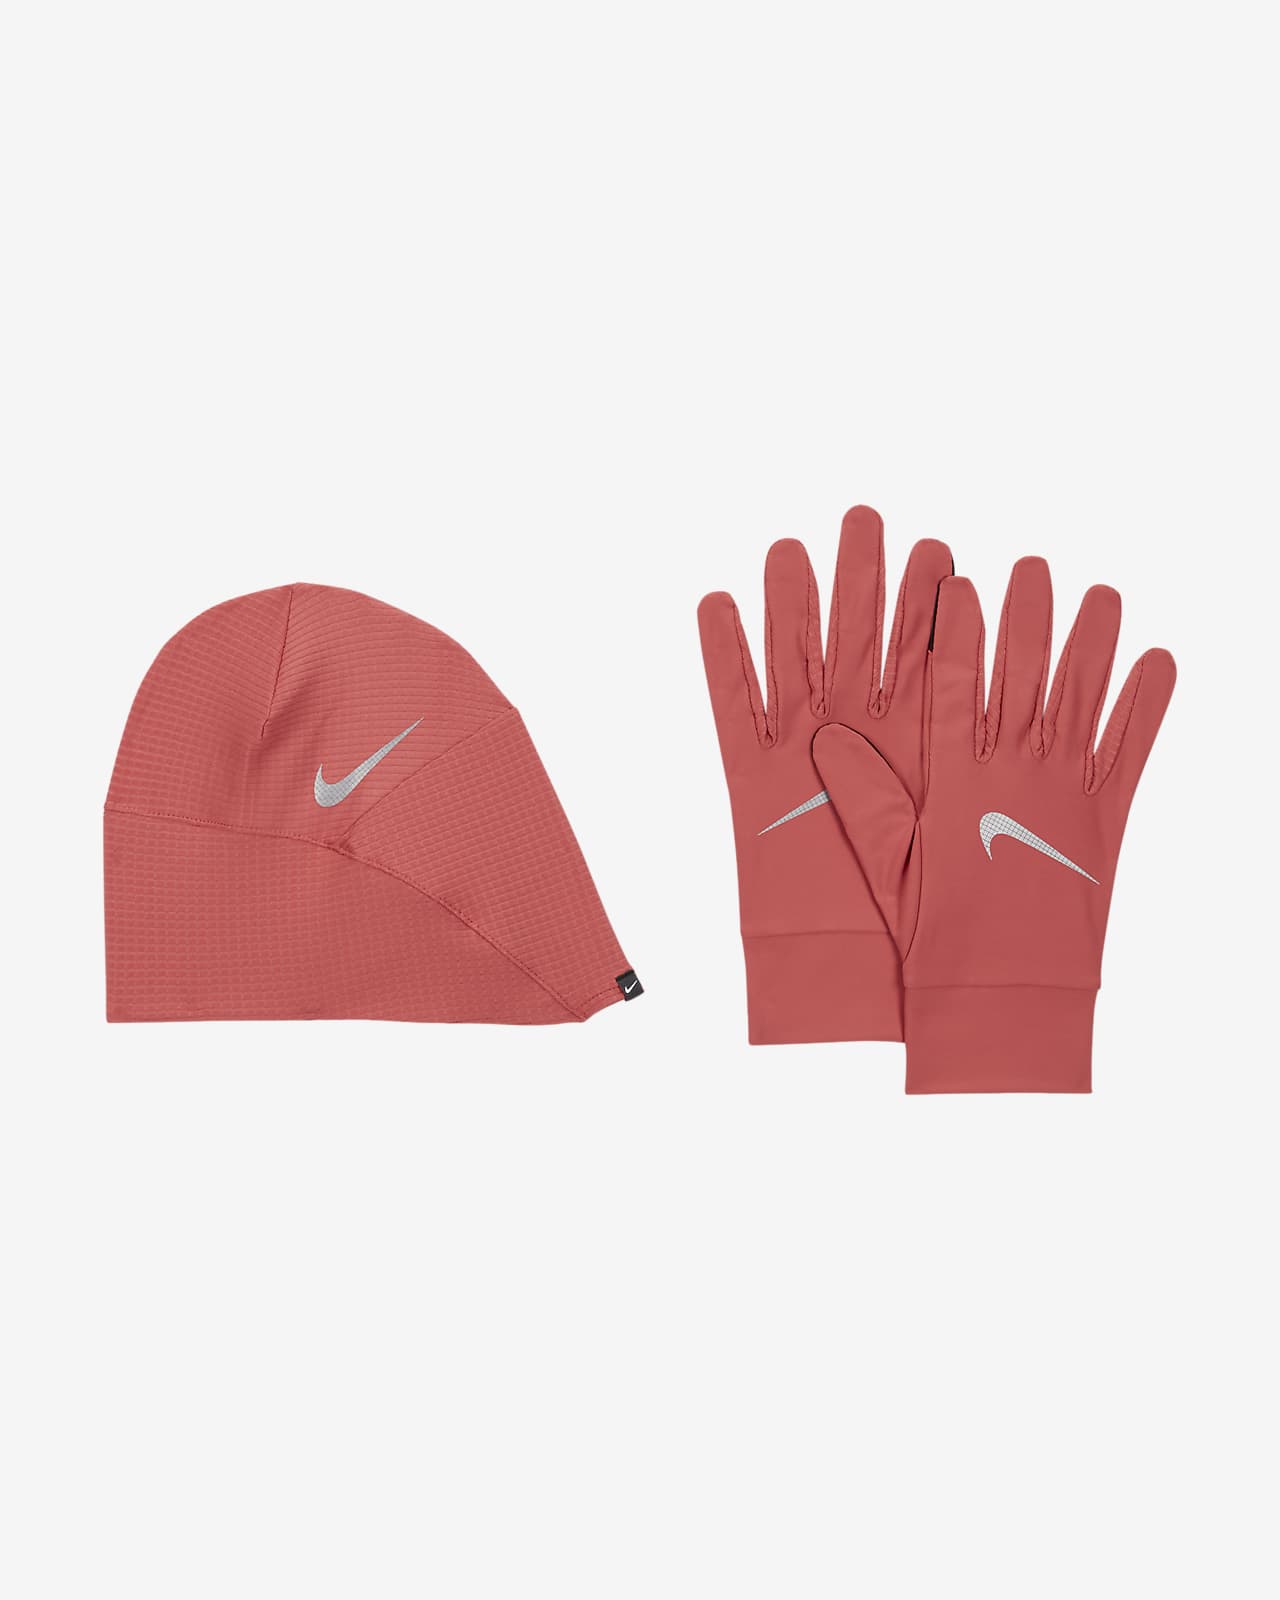 Hats and Gloves Collection for Women